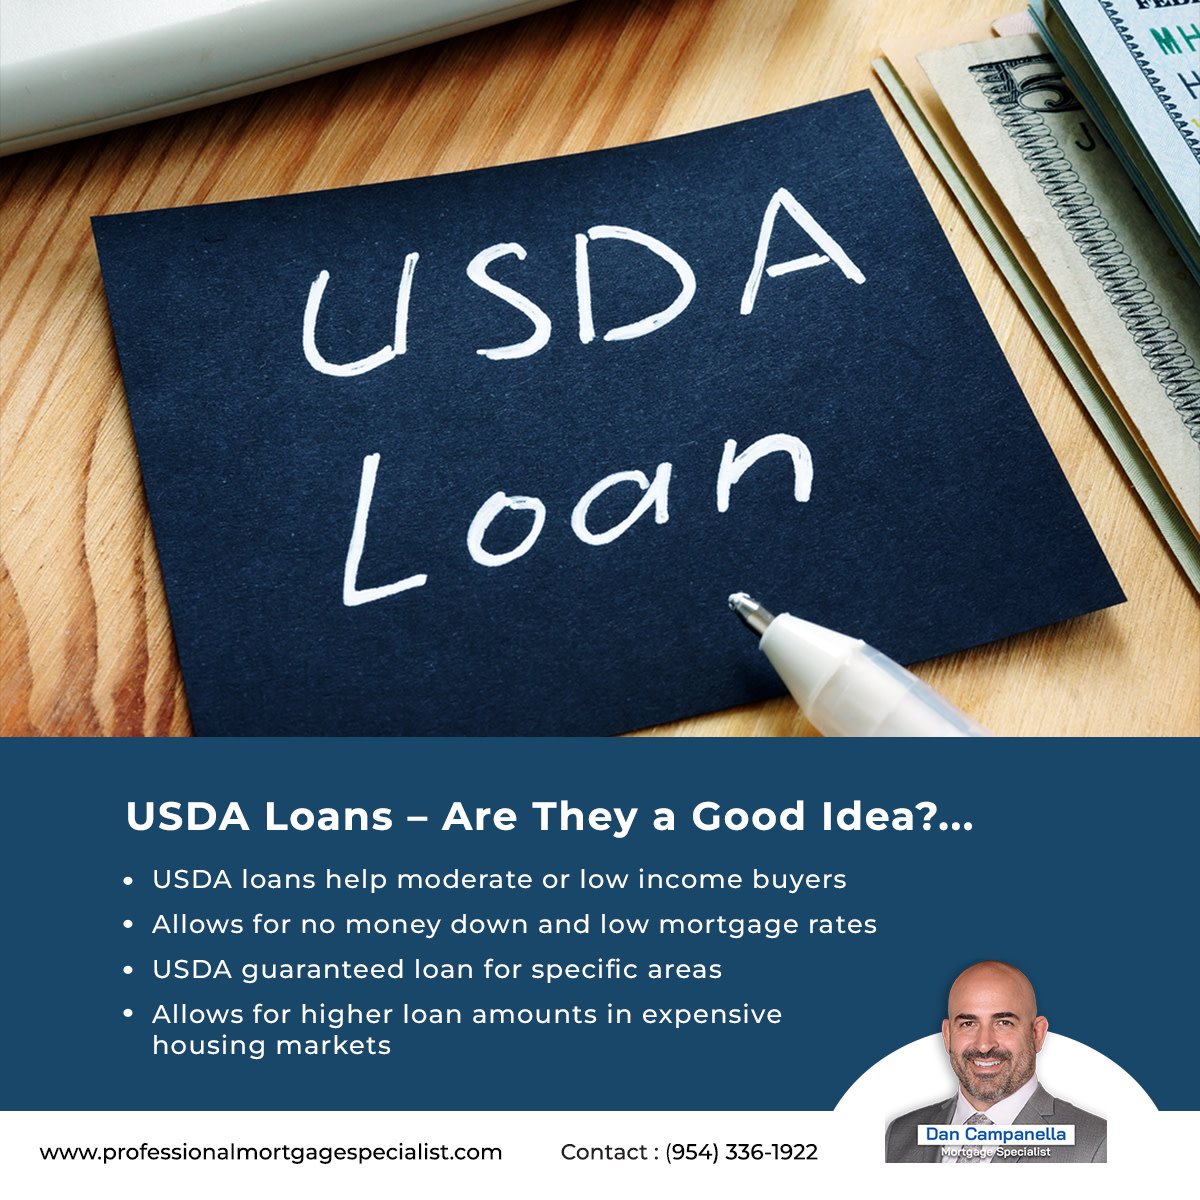 USDA Loans – Are They a Good Idea?...
LEARN MORE... professionalmortgagespecialist.com/usda-loans-are…

#buyahome #buyahouse #mortgage #mortgages #finances #financialtips #loans #homeloan #homeloans #interest #interestrates #refinance #realtoradvice #realtortips #forrealtors